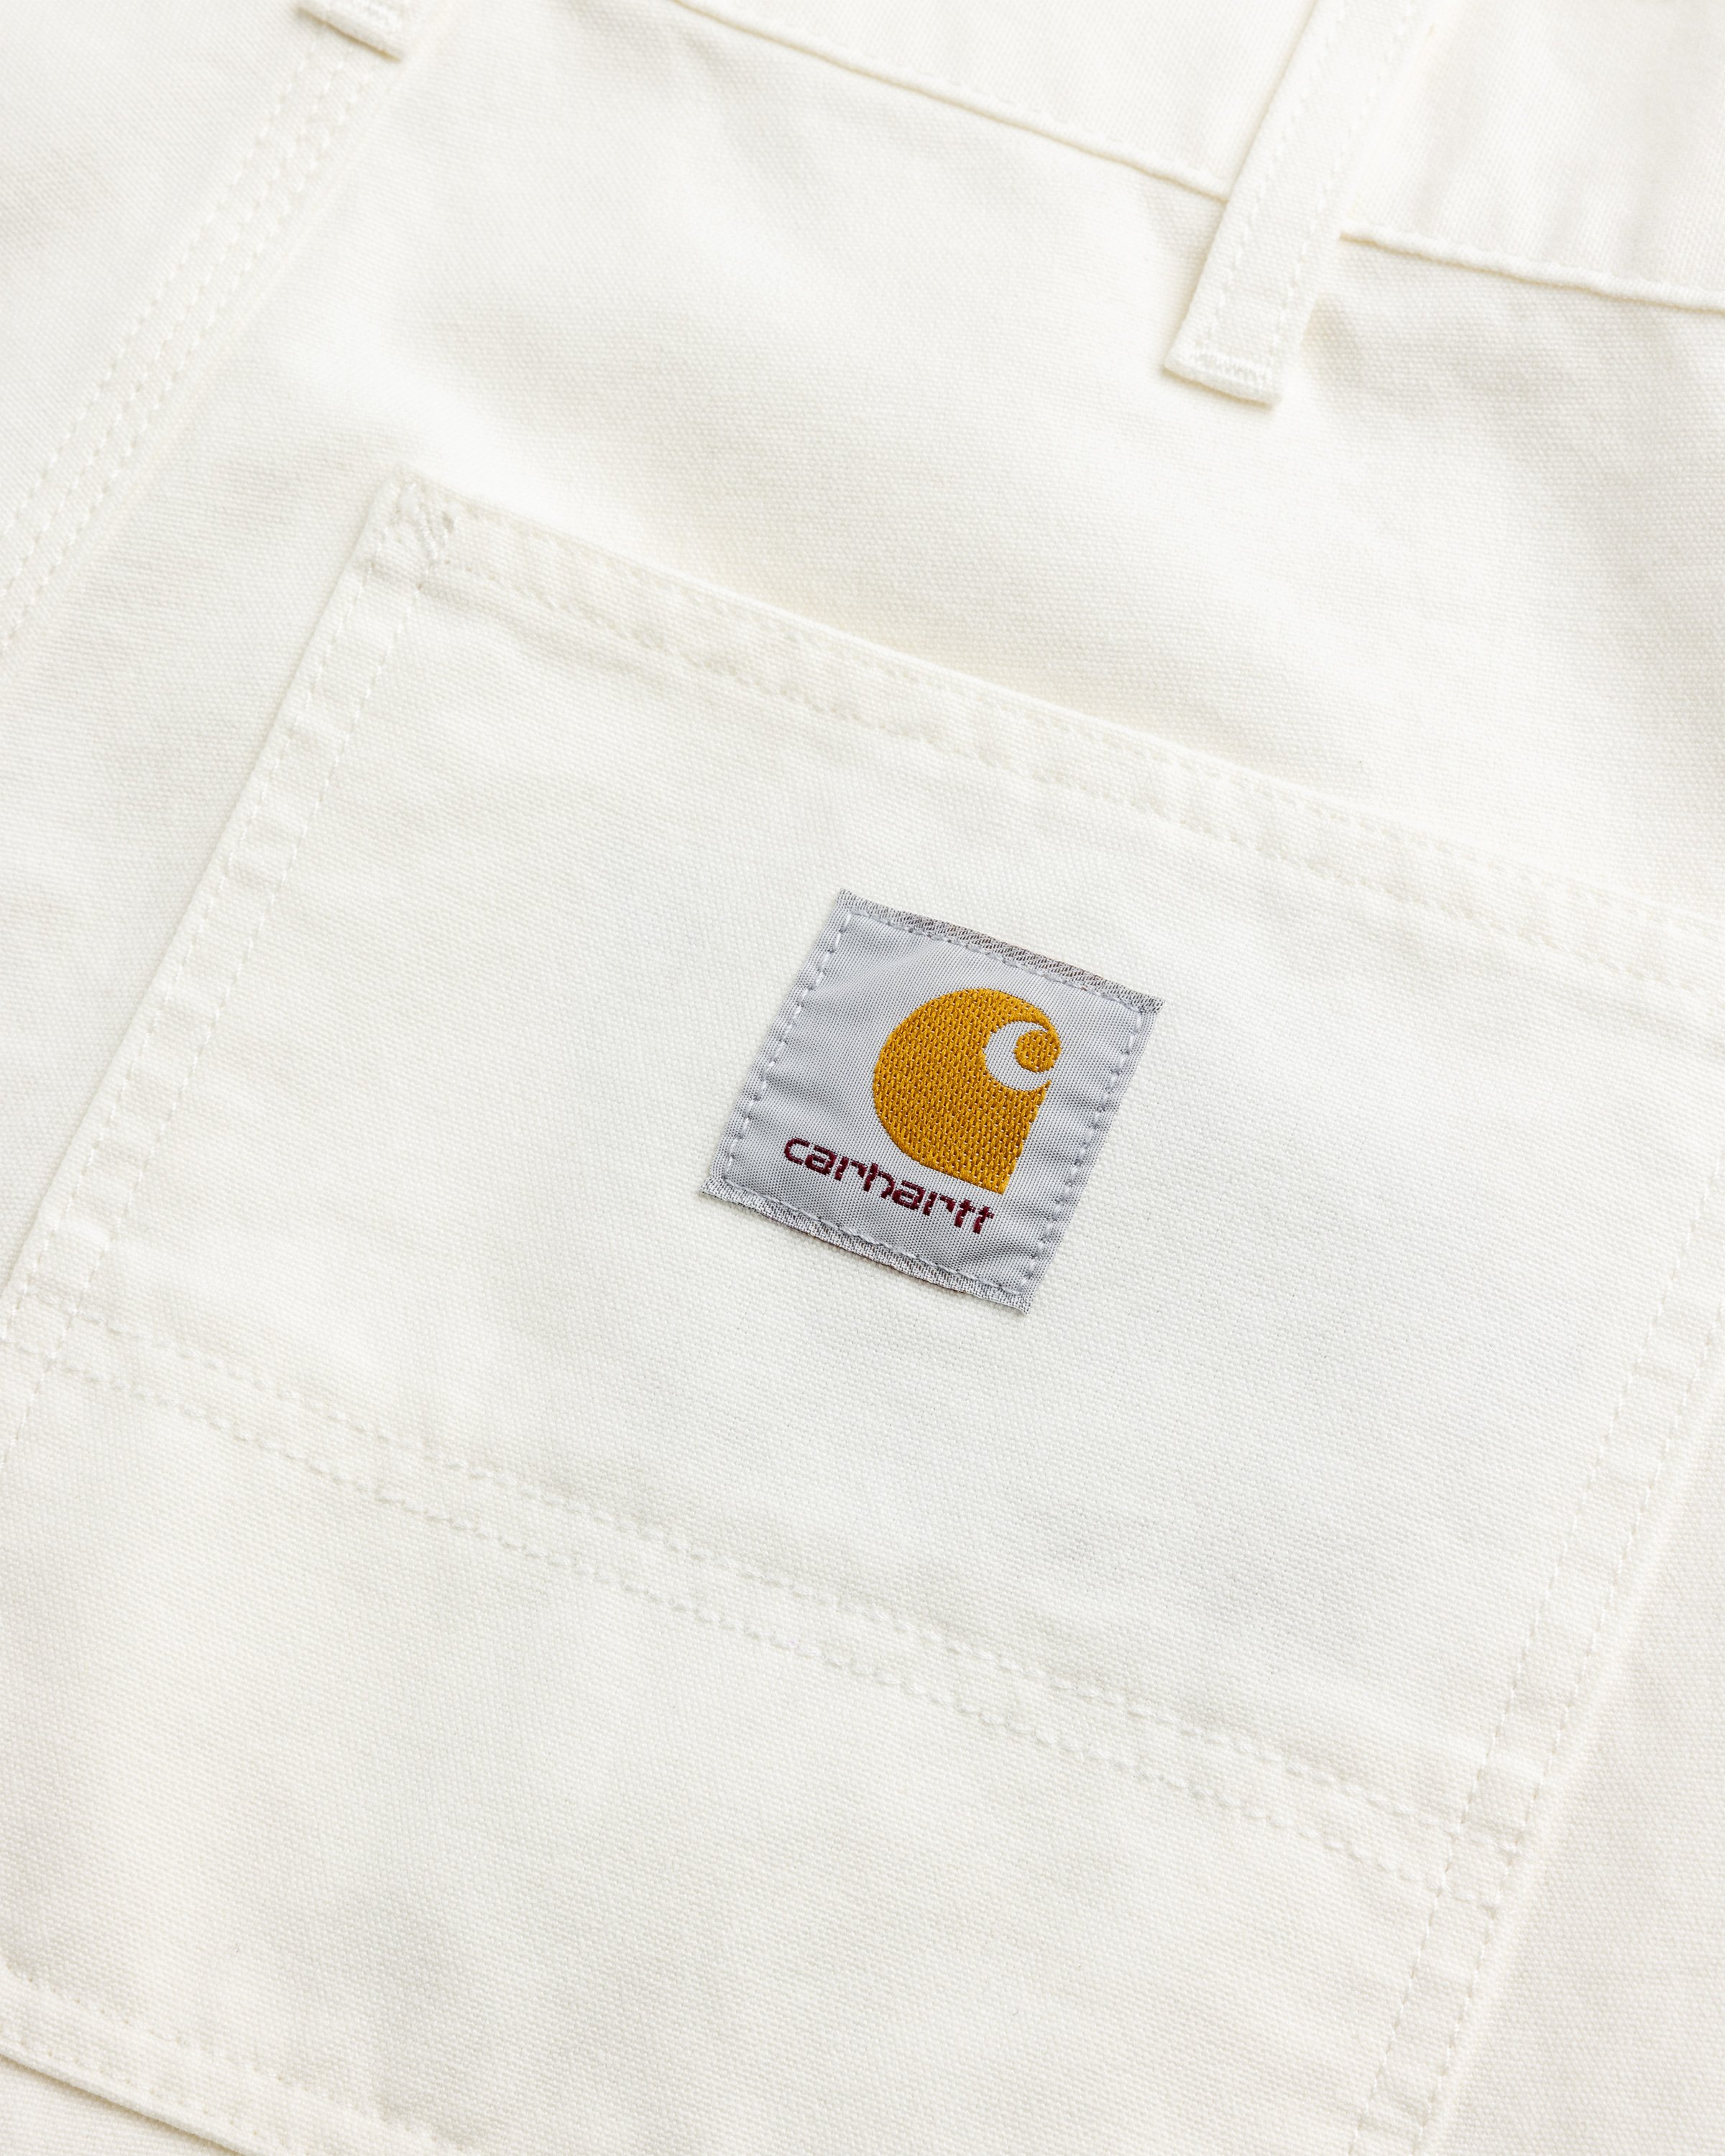 Carhartt WIP - Wide Panel Pant Wax /rinsed - Clothing - White - Image 7